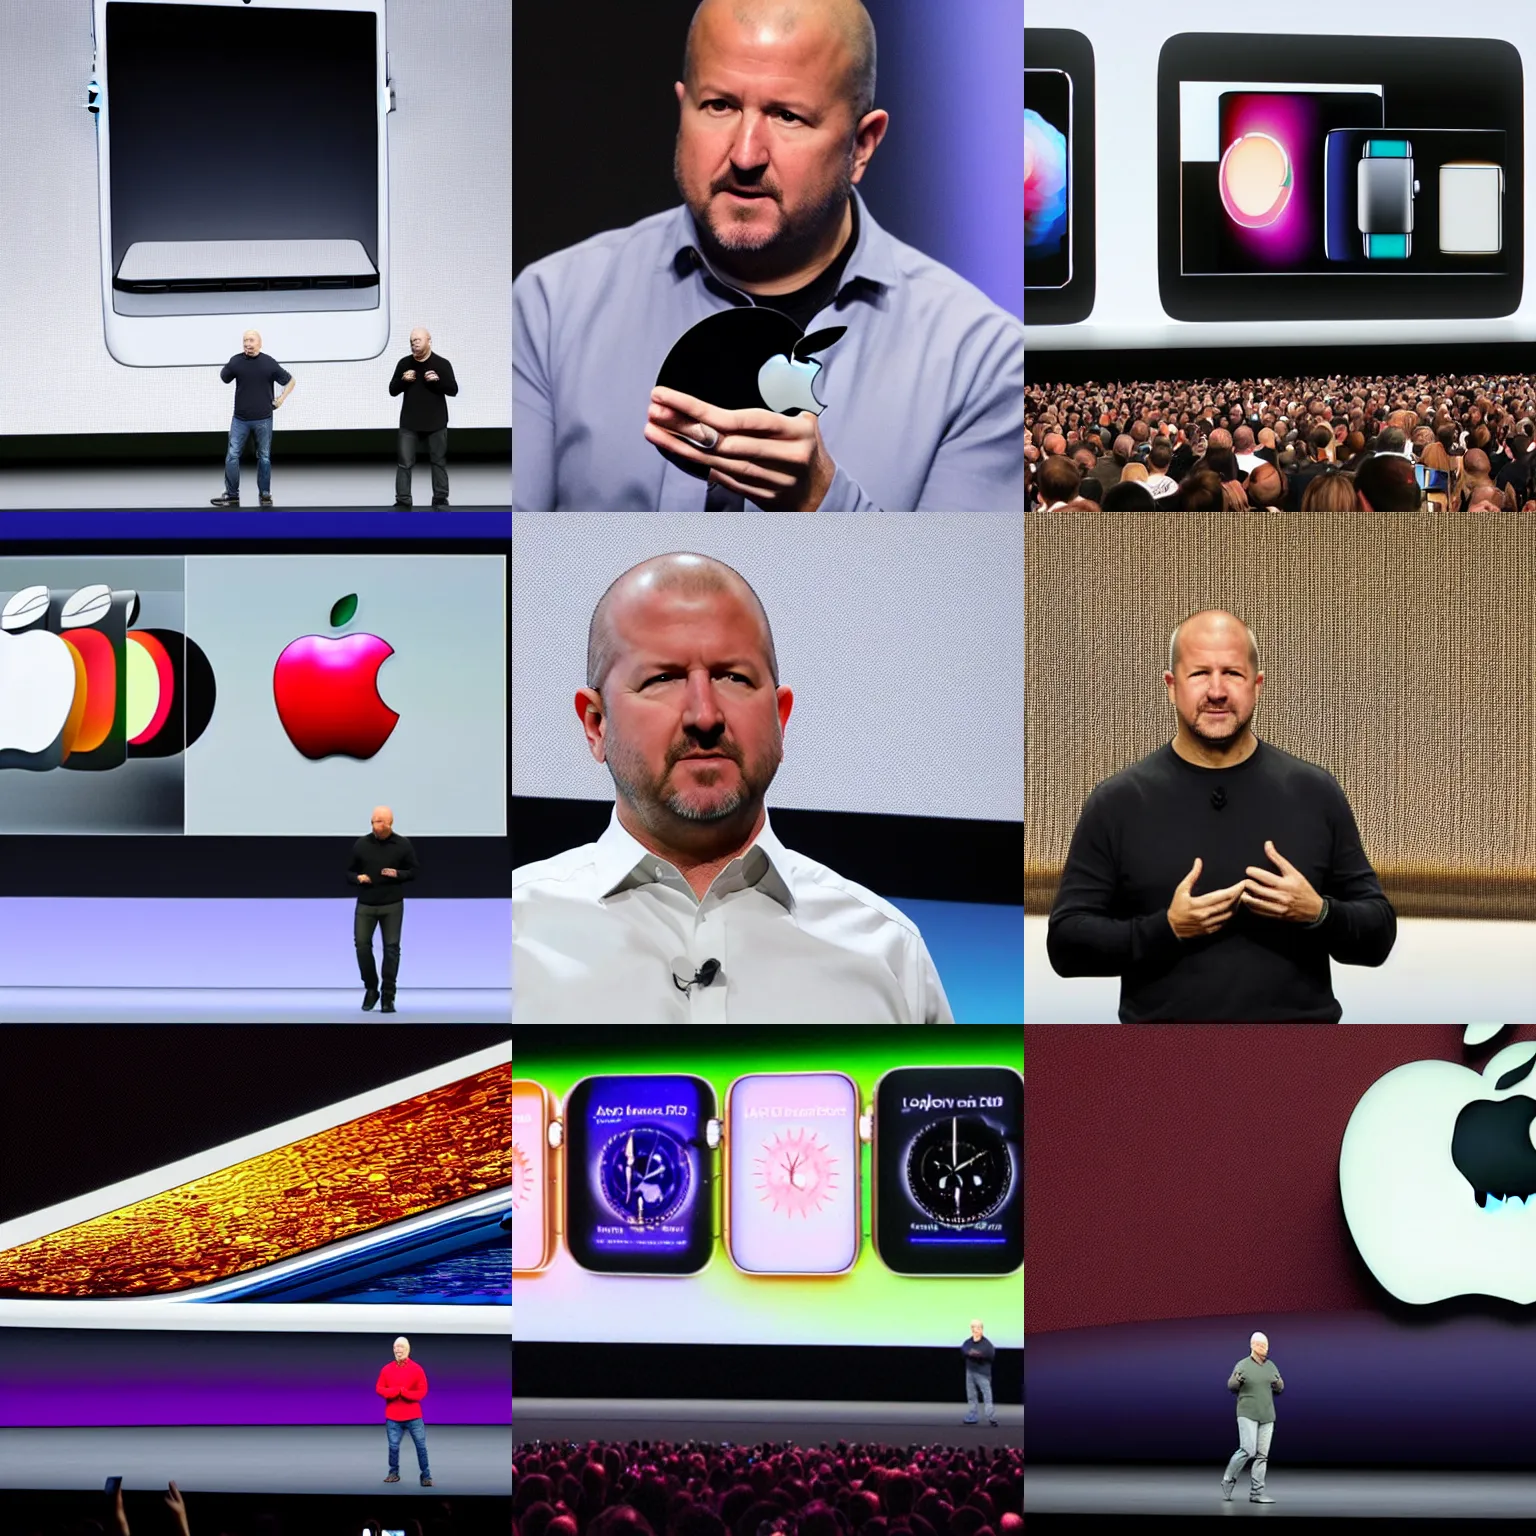 Prompt: jony ive introducing a brand new apple product, on stage